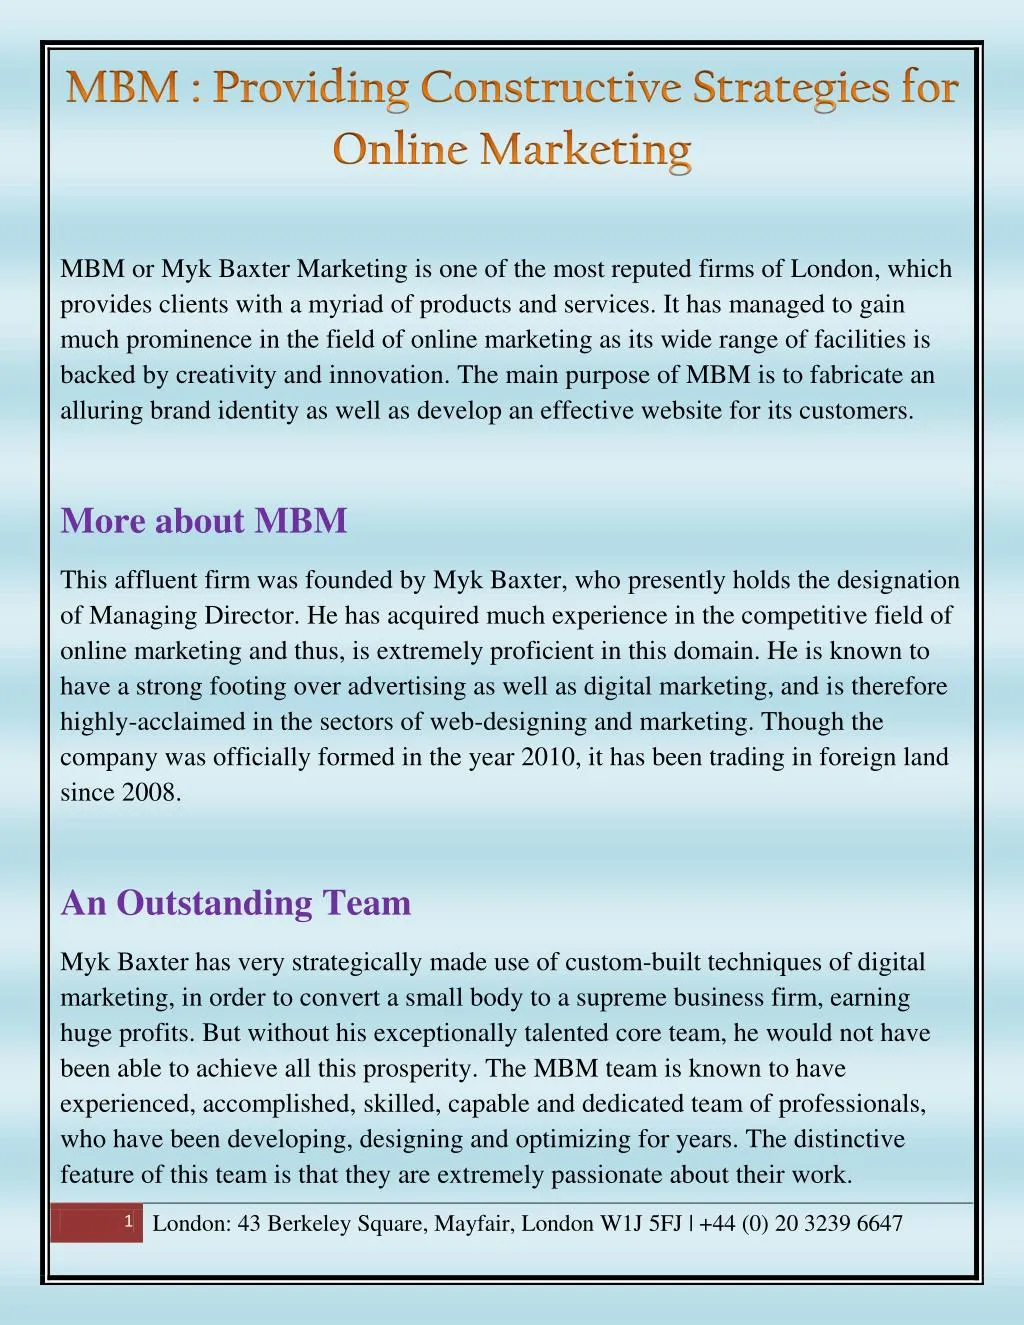 mbm or myk baxter marketing is one of the most